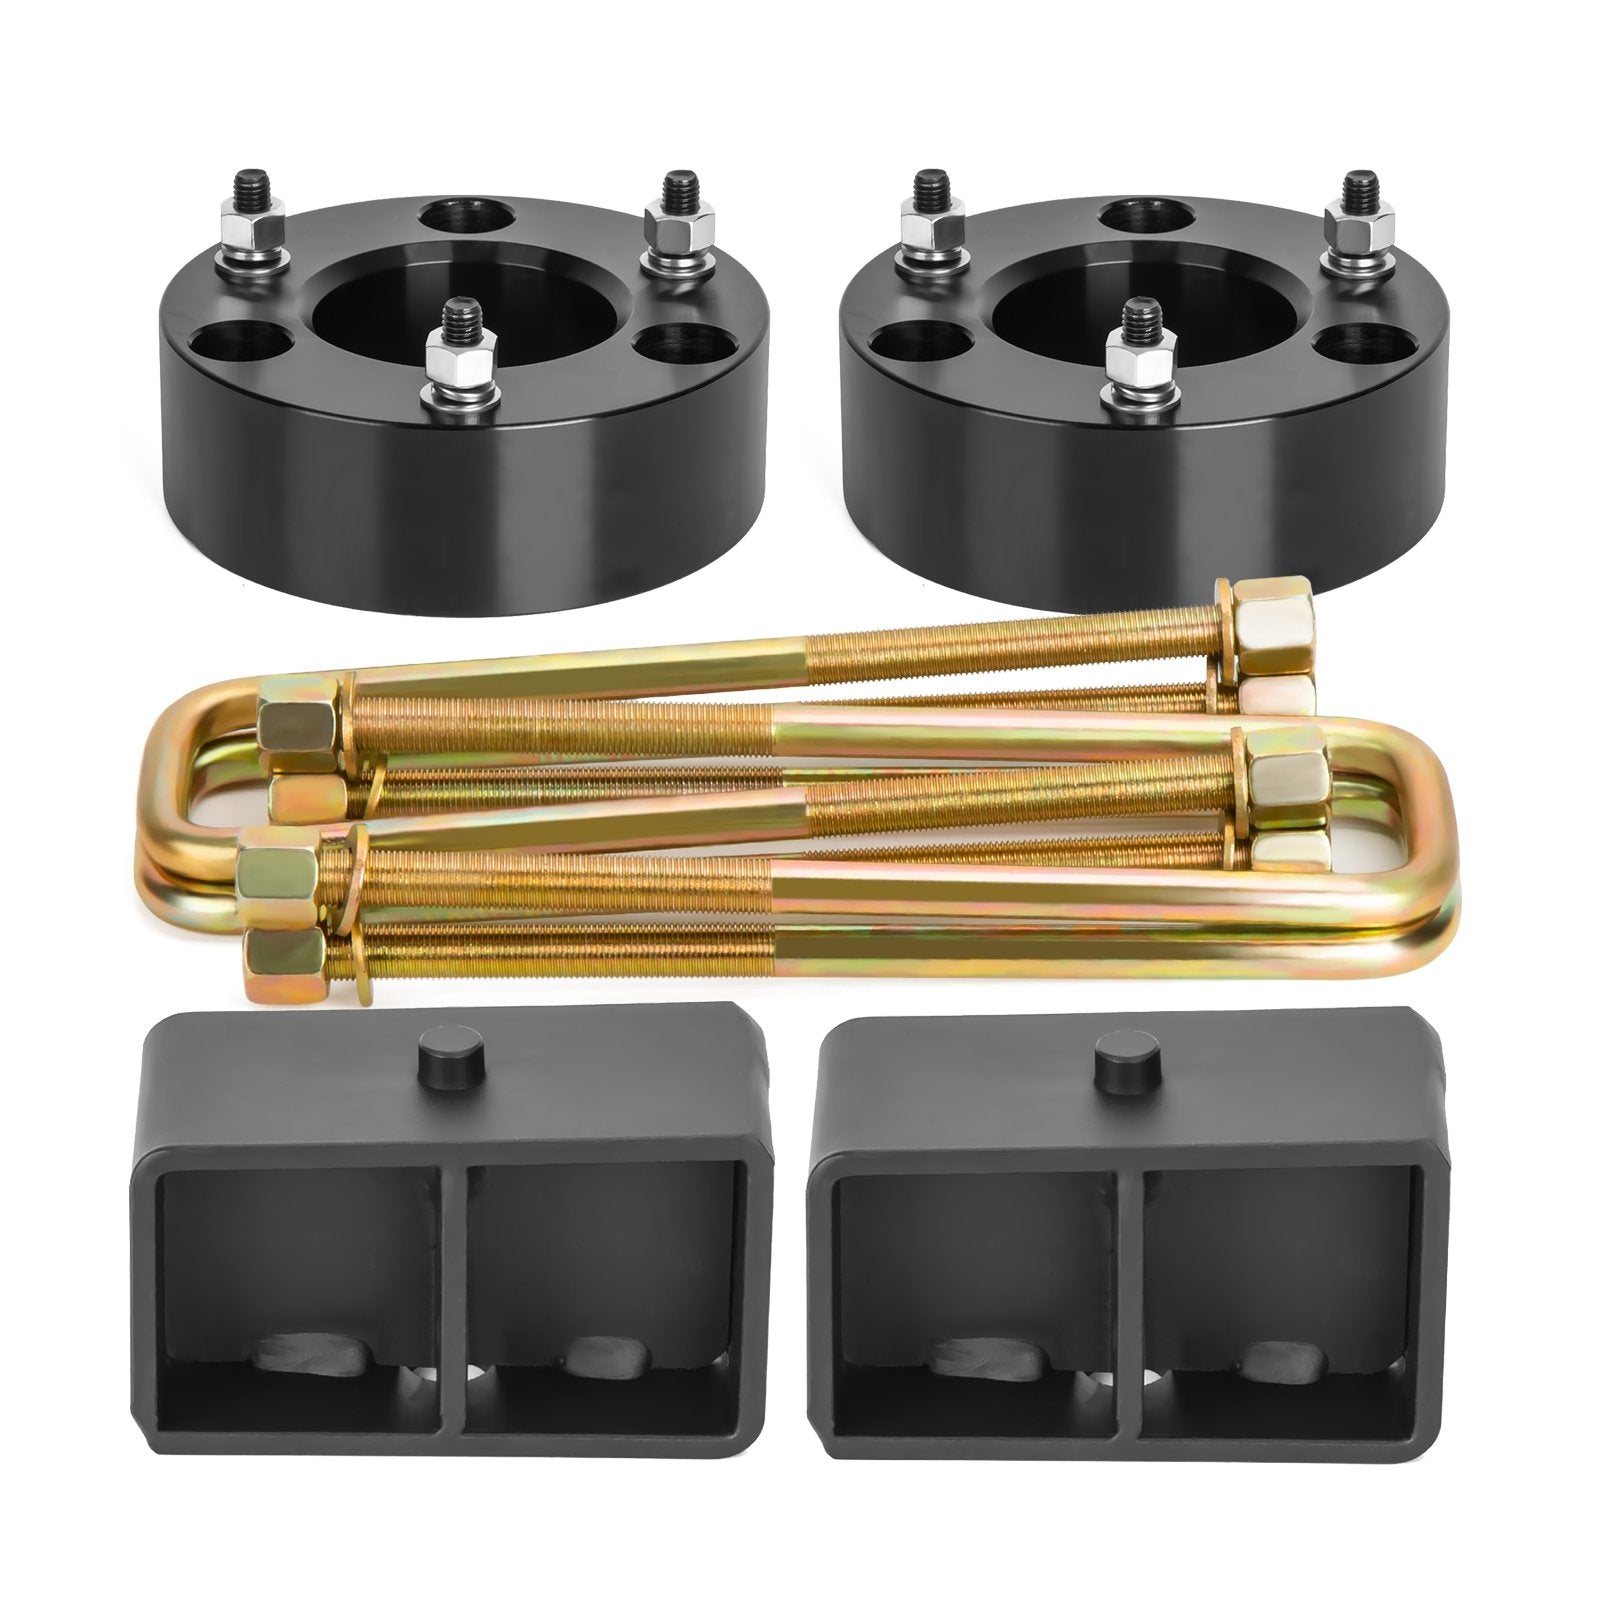 3" Front And 2" Rear Leveling Lift Kit For 2007-2020 Chevy Silverado GMC Sierra 2WD/4WD xccscss.